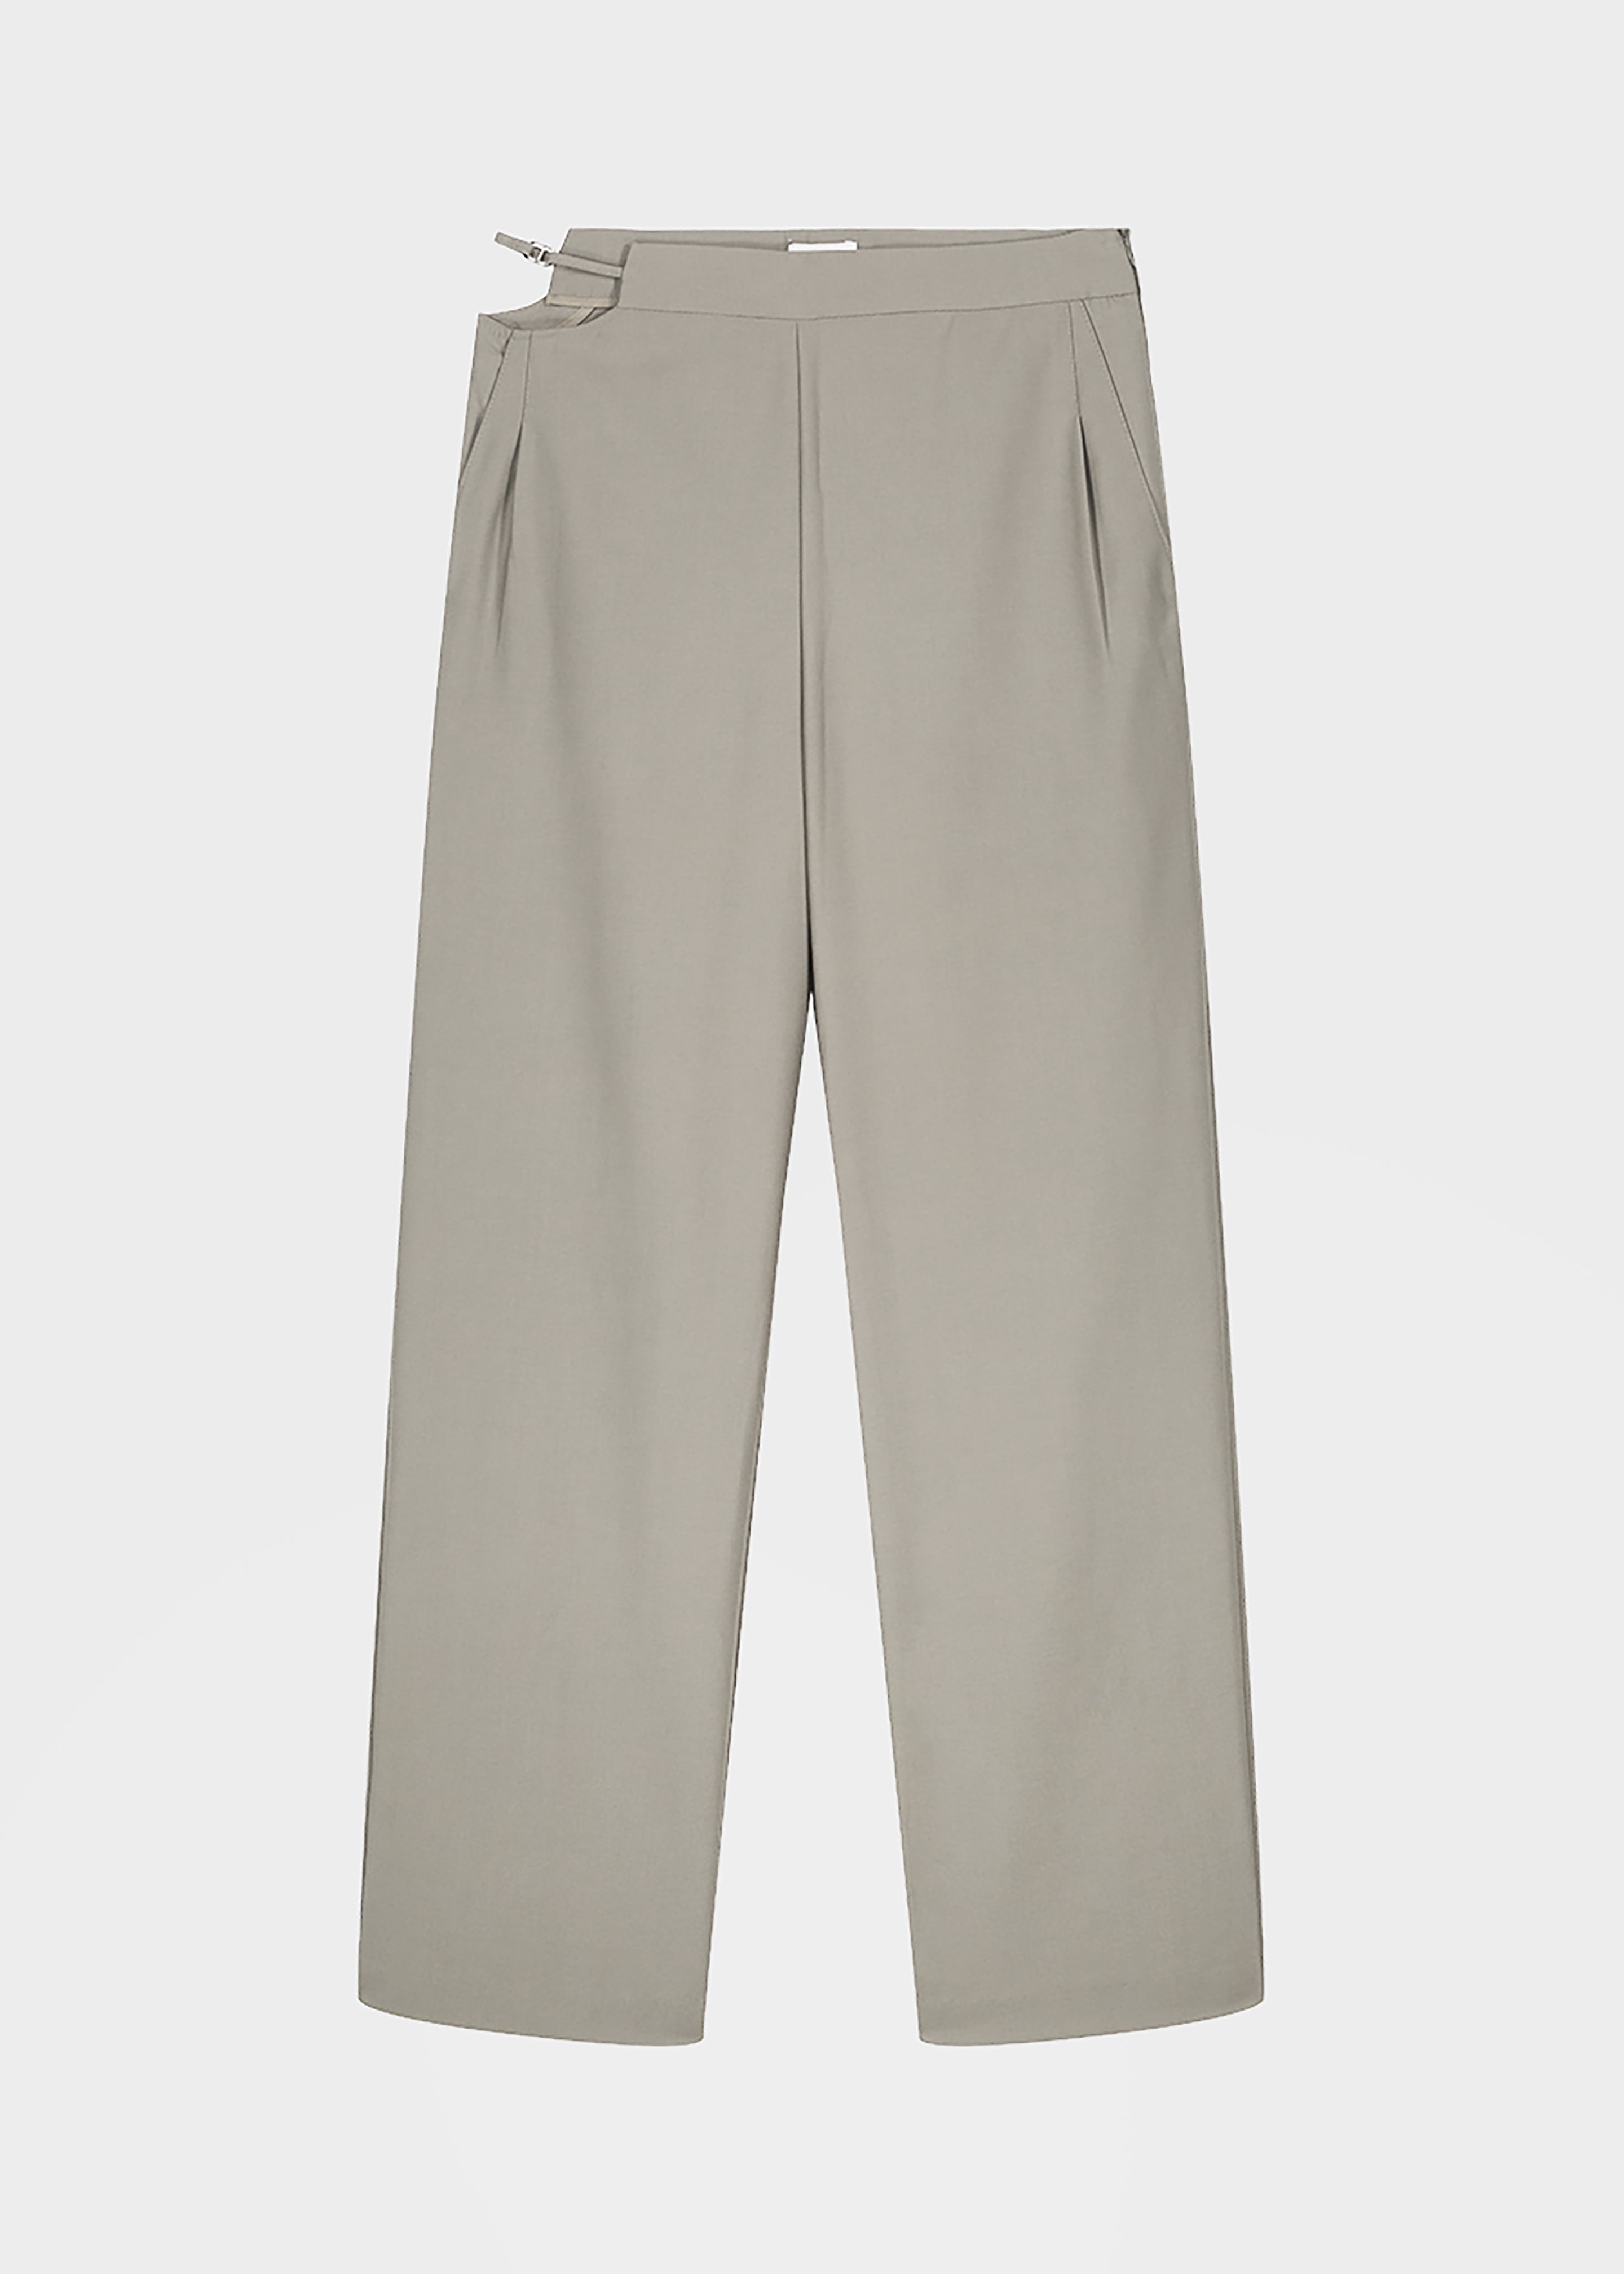 Louise Cut Out Trousers - Olive - 8